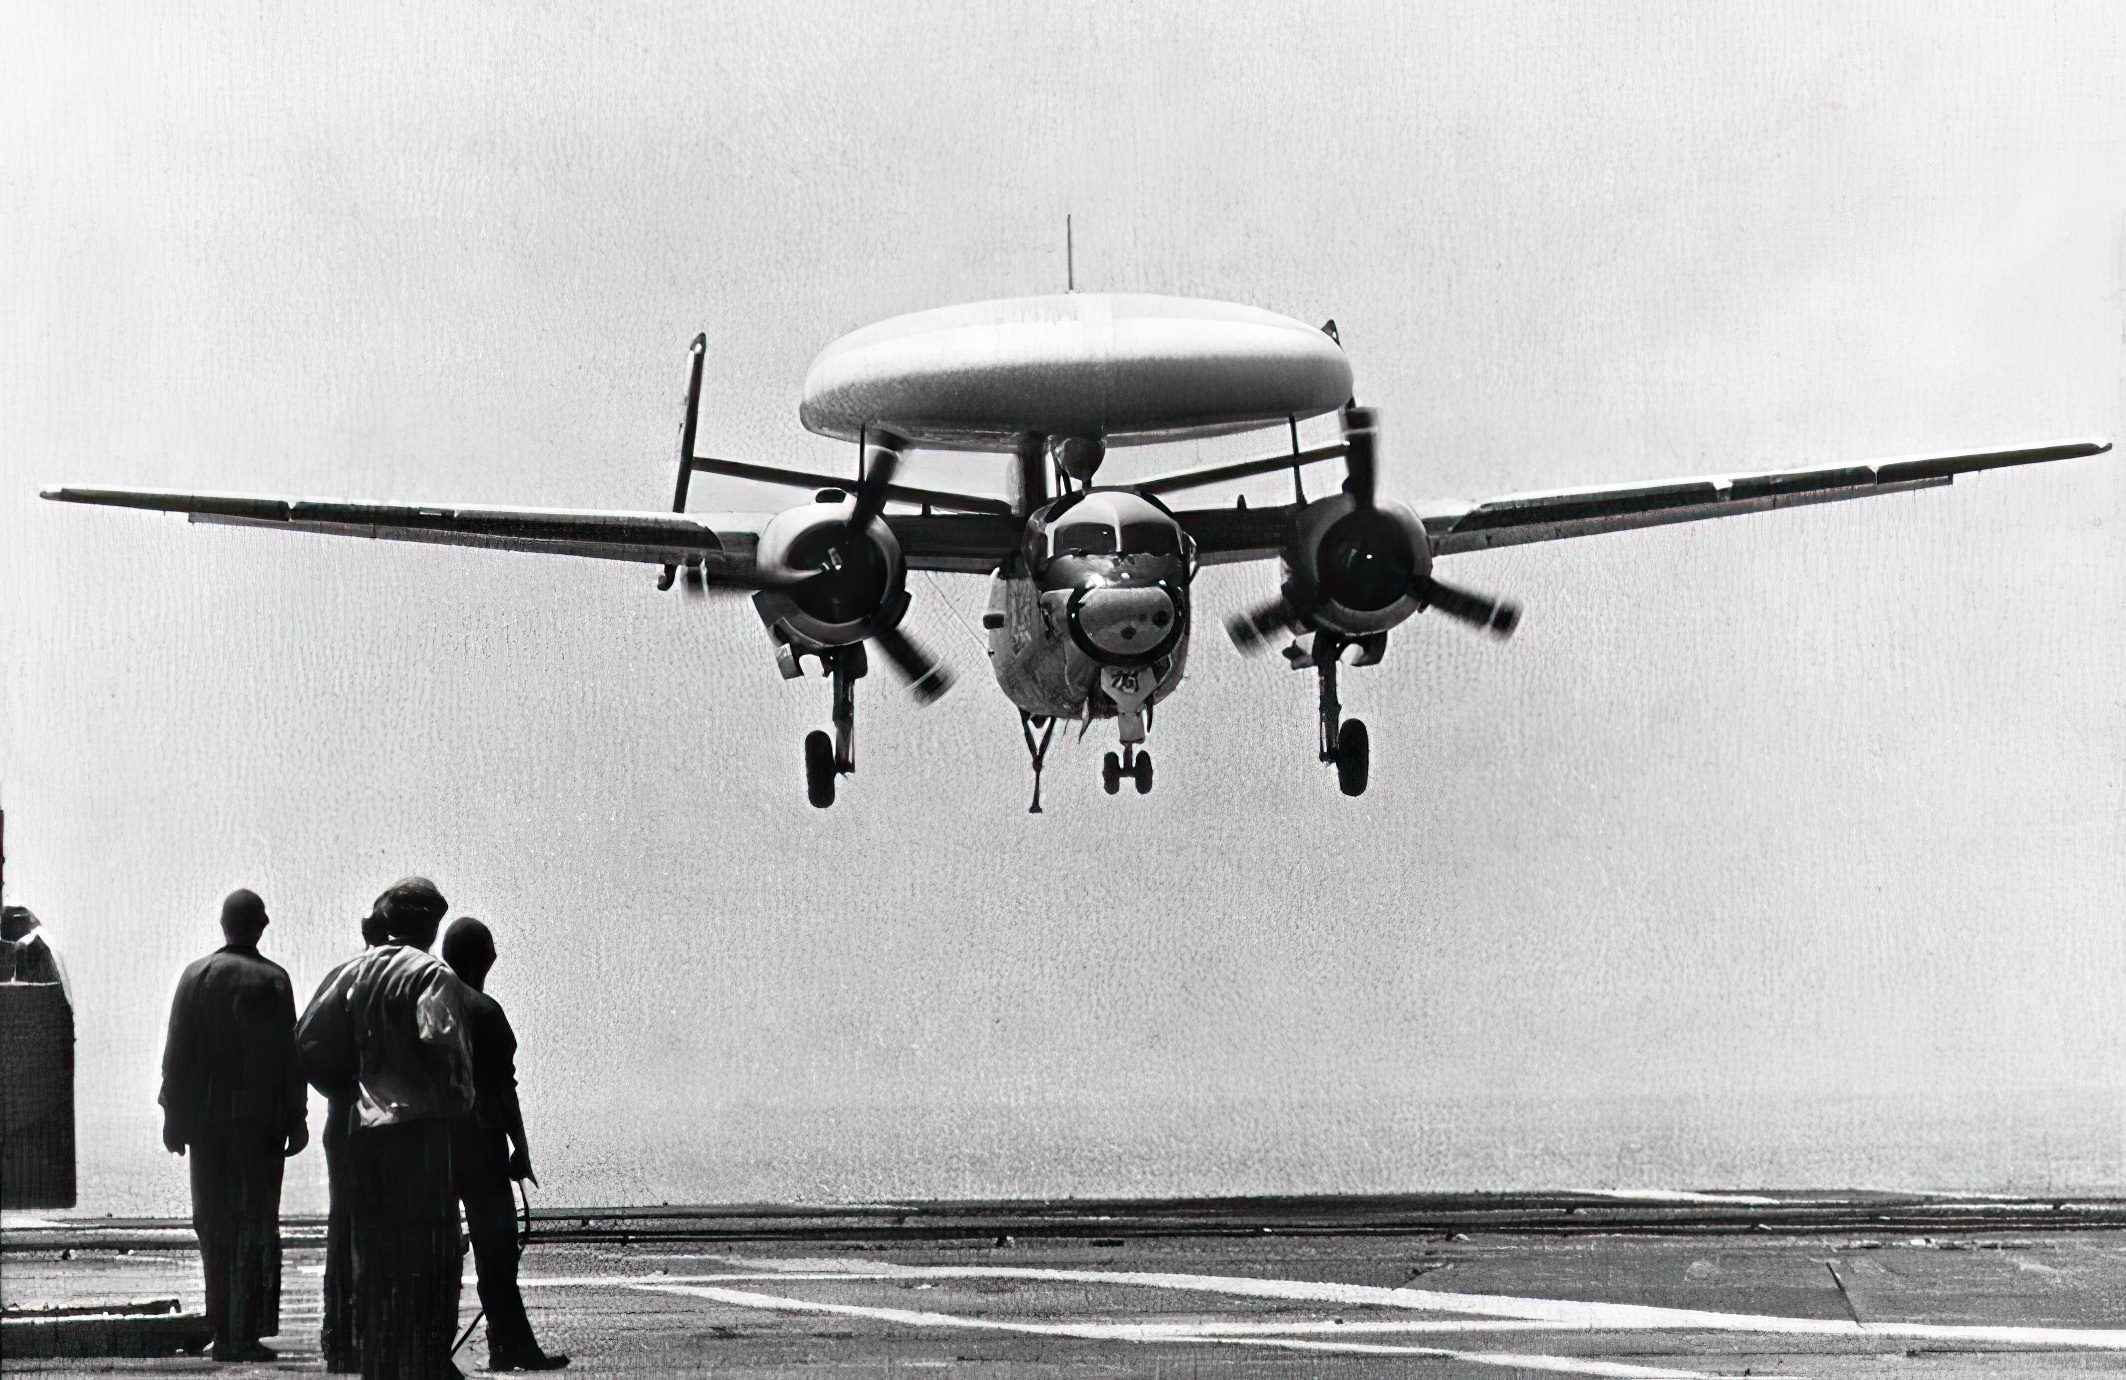 U.S. Navy Grumman E-1B Tracer from Carrier Airborne Early Warning Squadron 111 (VAW-111) Det.20 "Hunters"